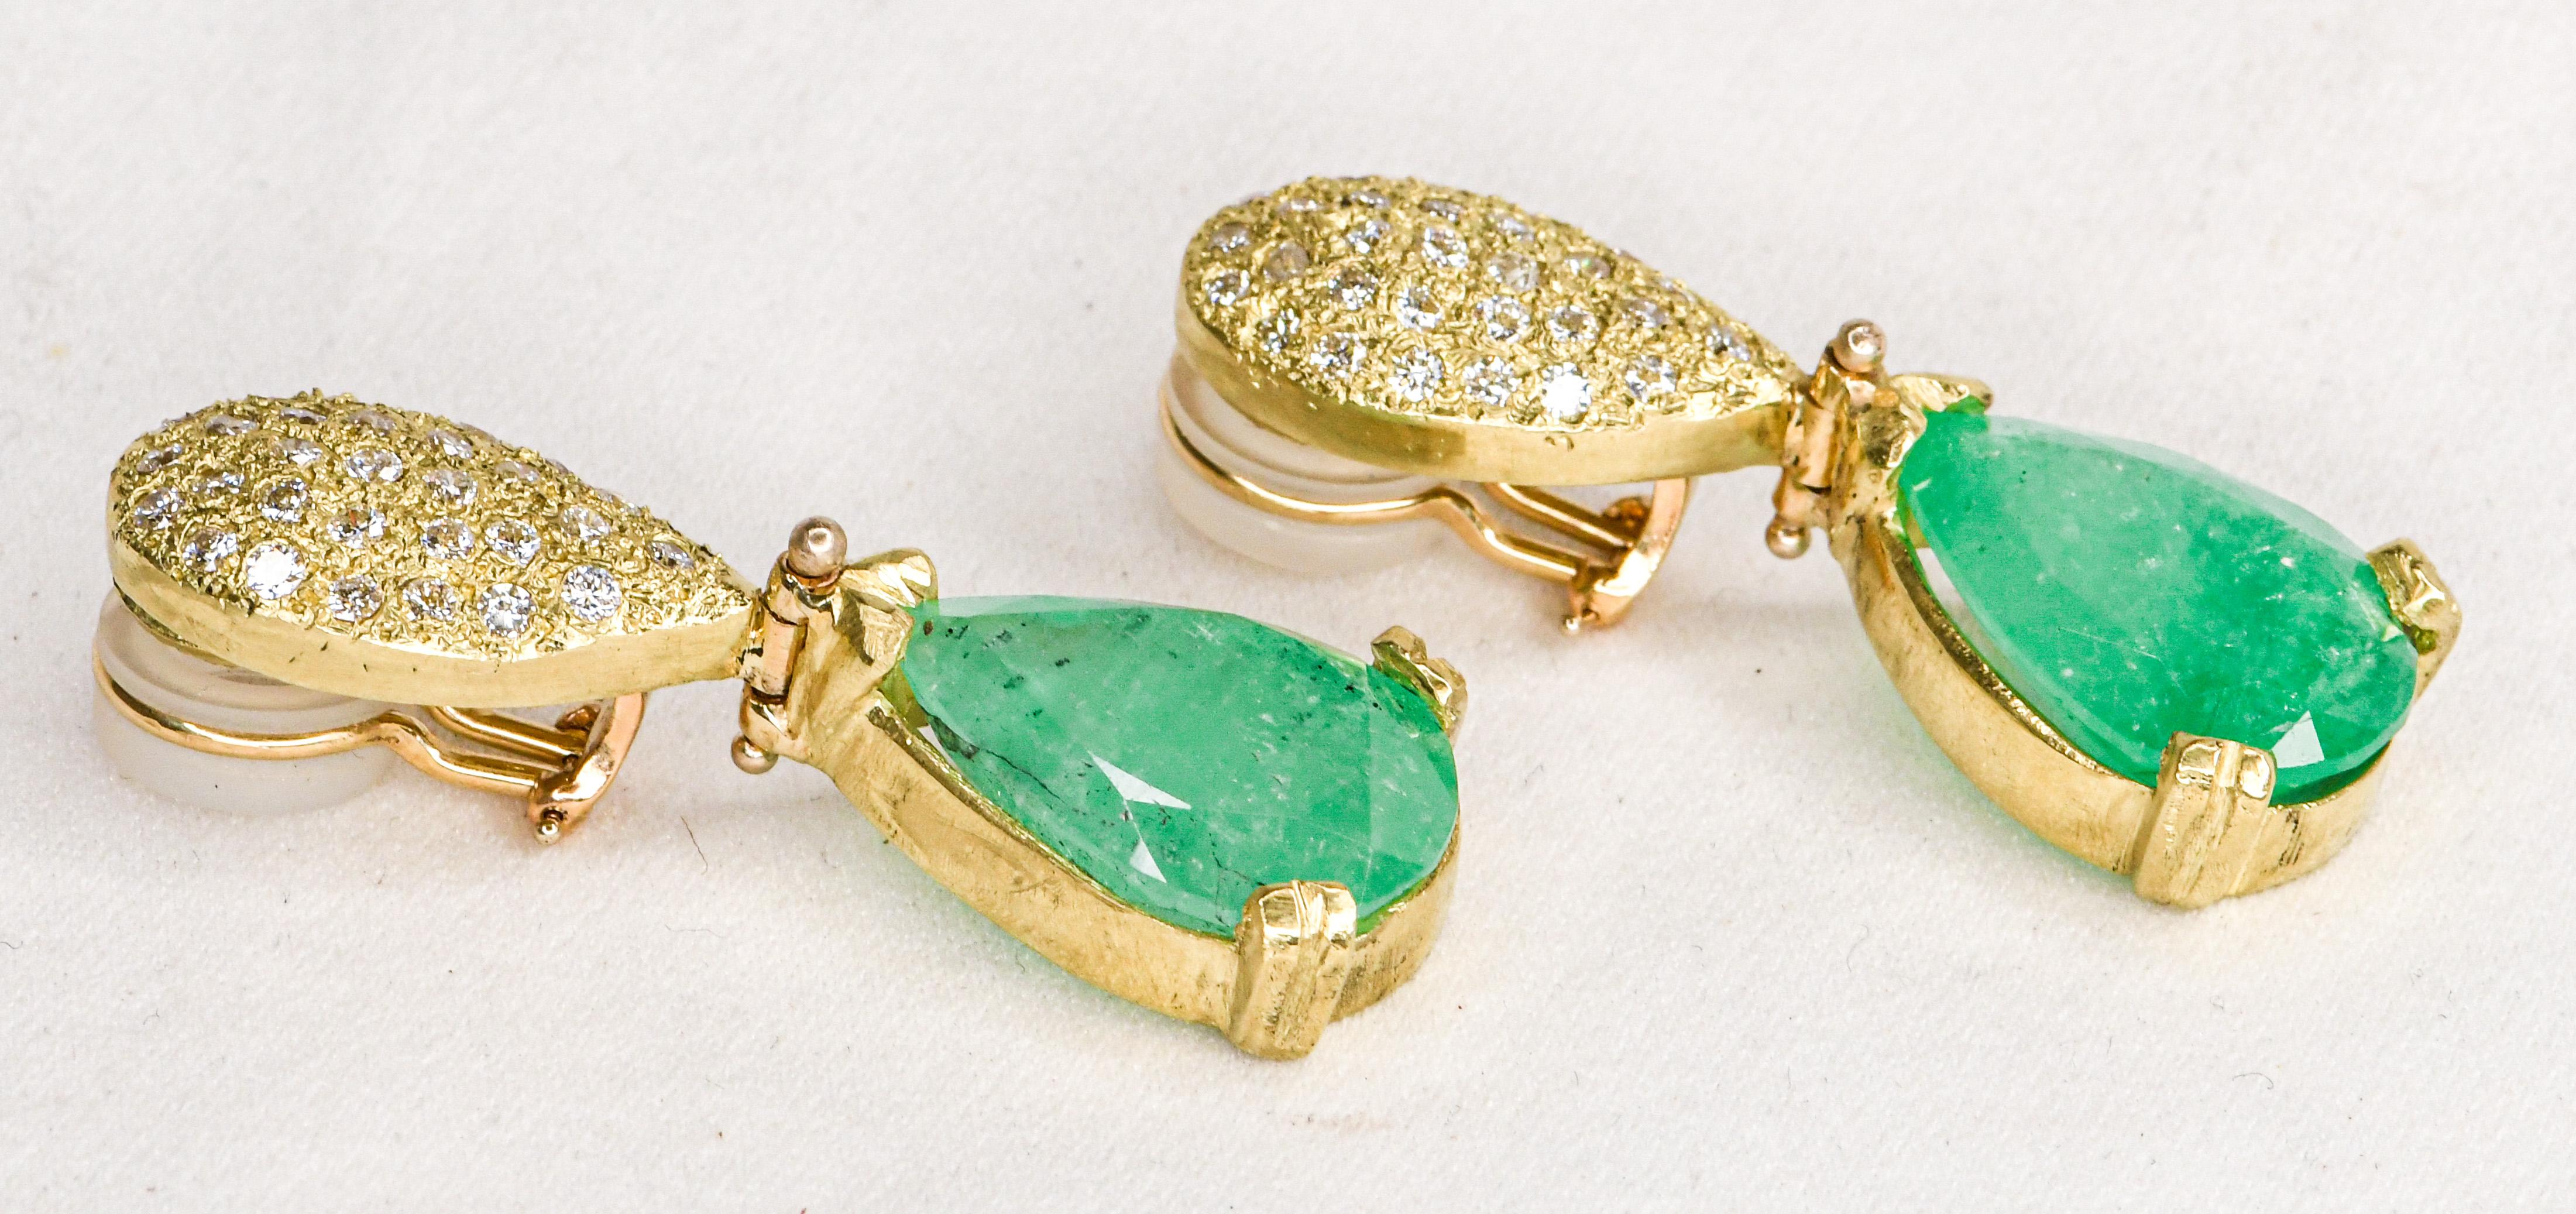 Julia Boss only uses the very best gems in her unforgettable creations.  These drop earrings are no exception!  Set in 18K yellow gold, these provocative, pear shaped Columbian emeralds are perfectly complemented by clipons encrusted with pave